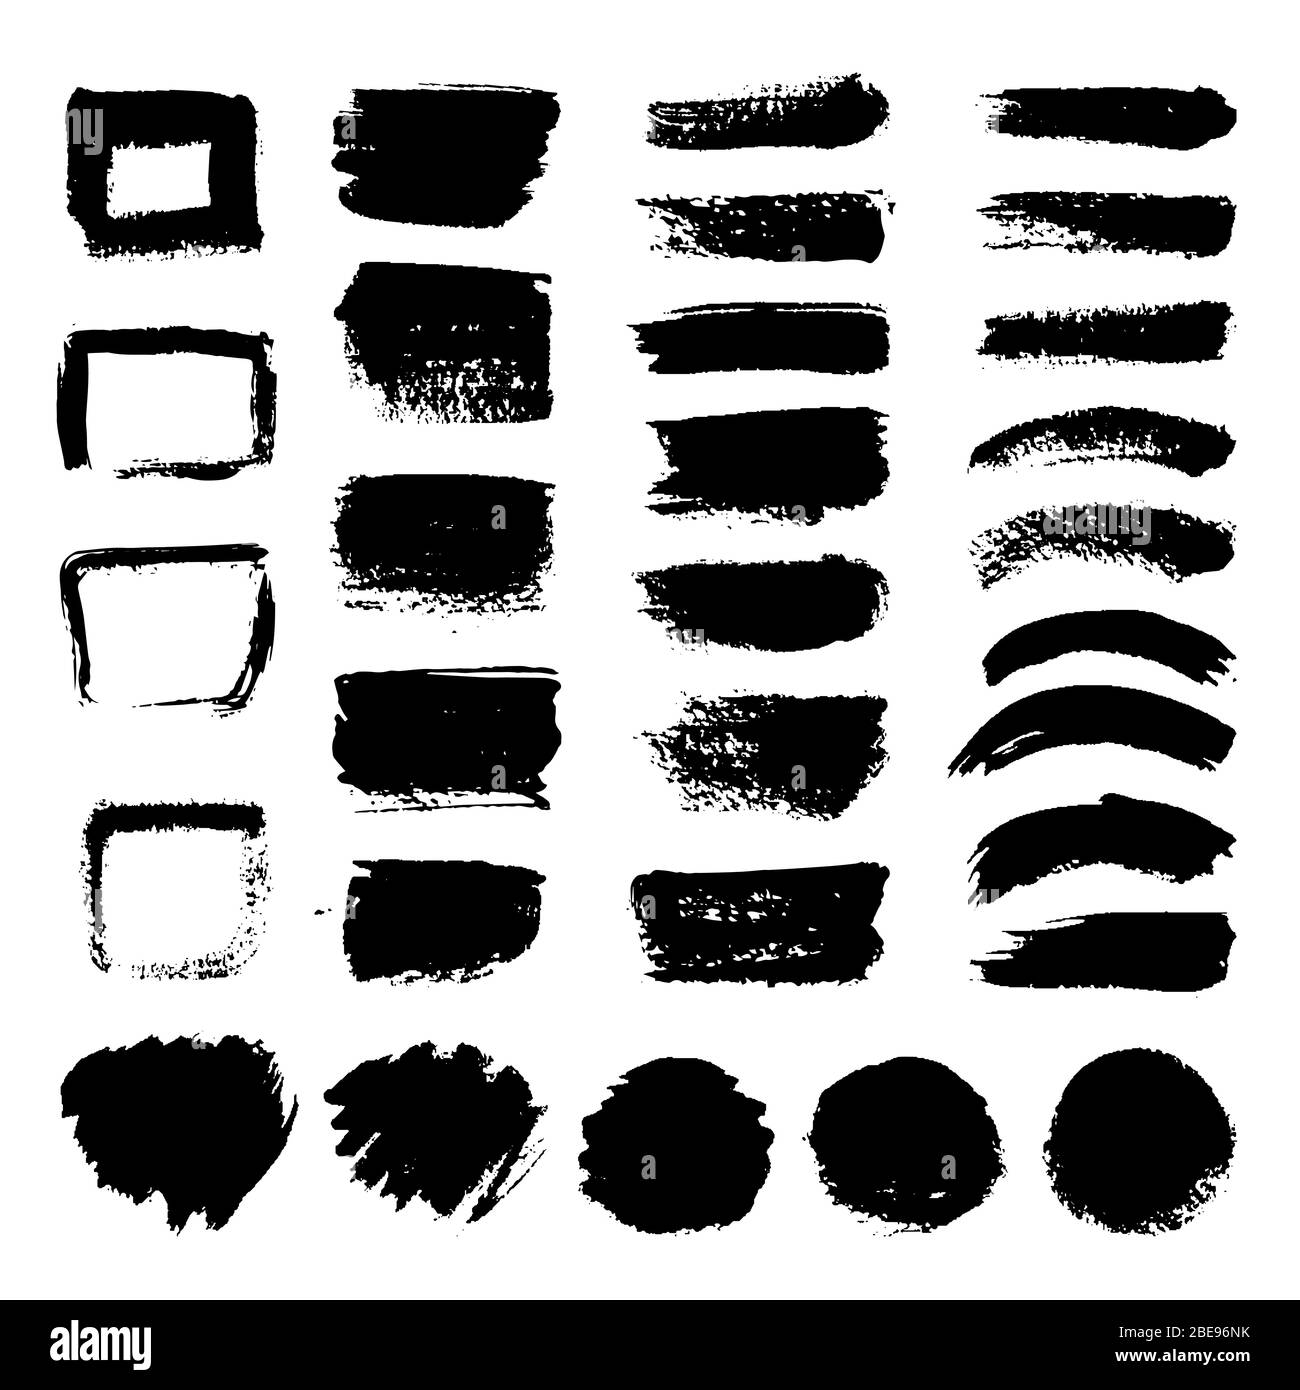 Ink black art brushes vector set. Dirty grunge painted strokes. Black paint and brush stroke dirty grunge illustration Stock Vector